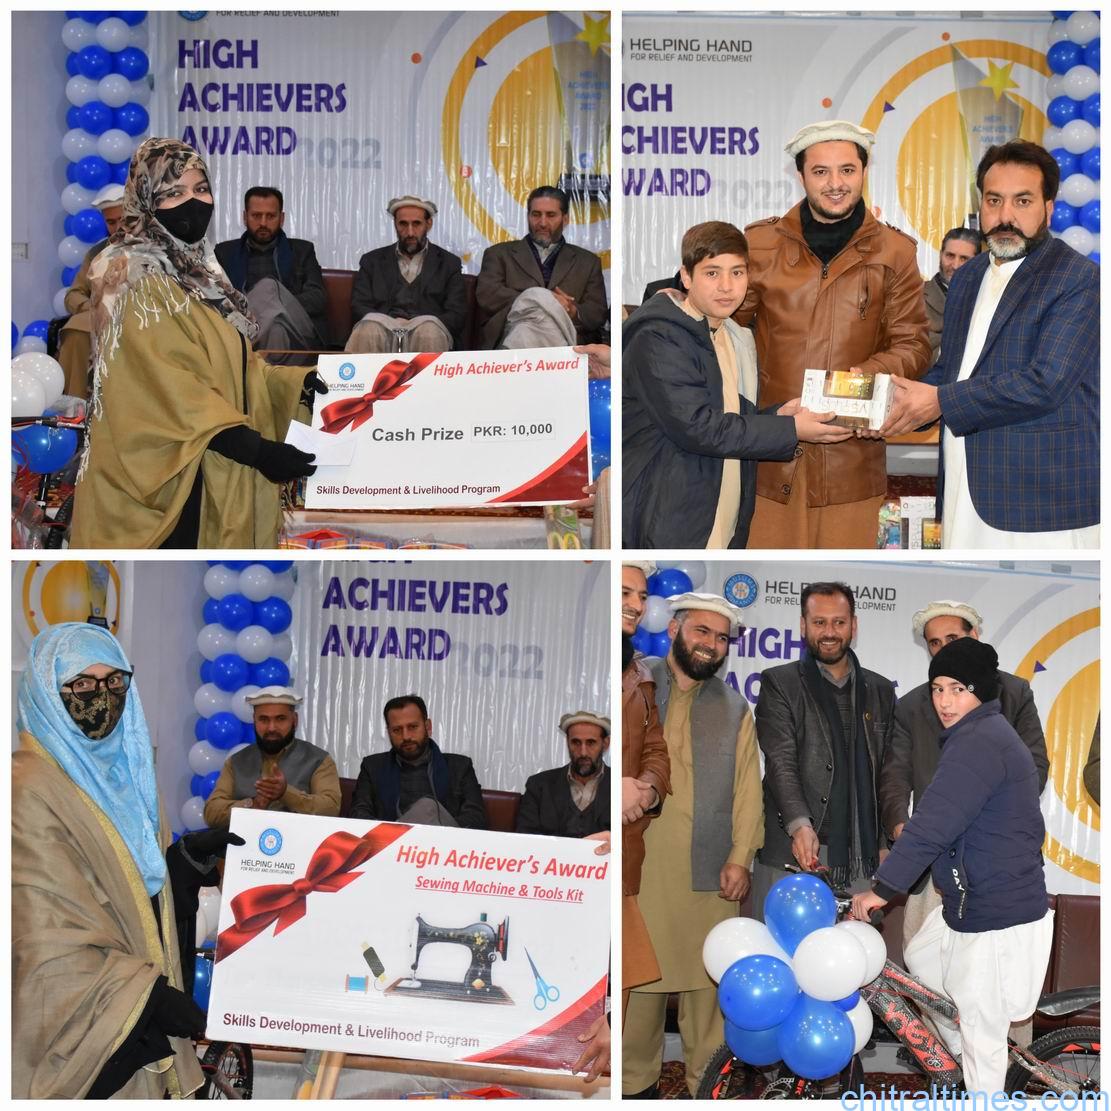 chitraltimes helping hand high achievers program 1